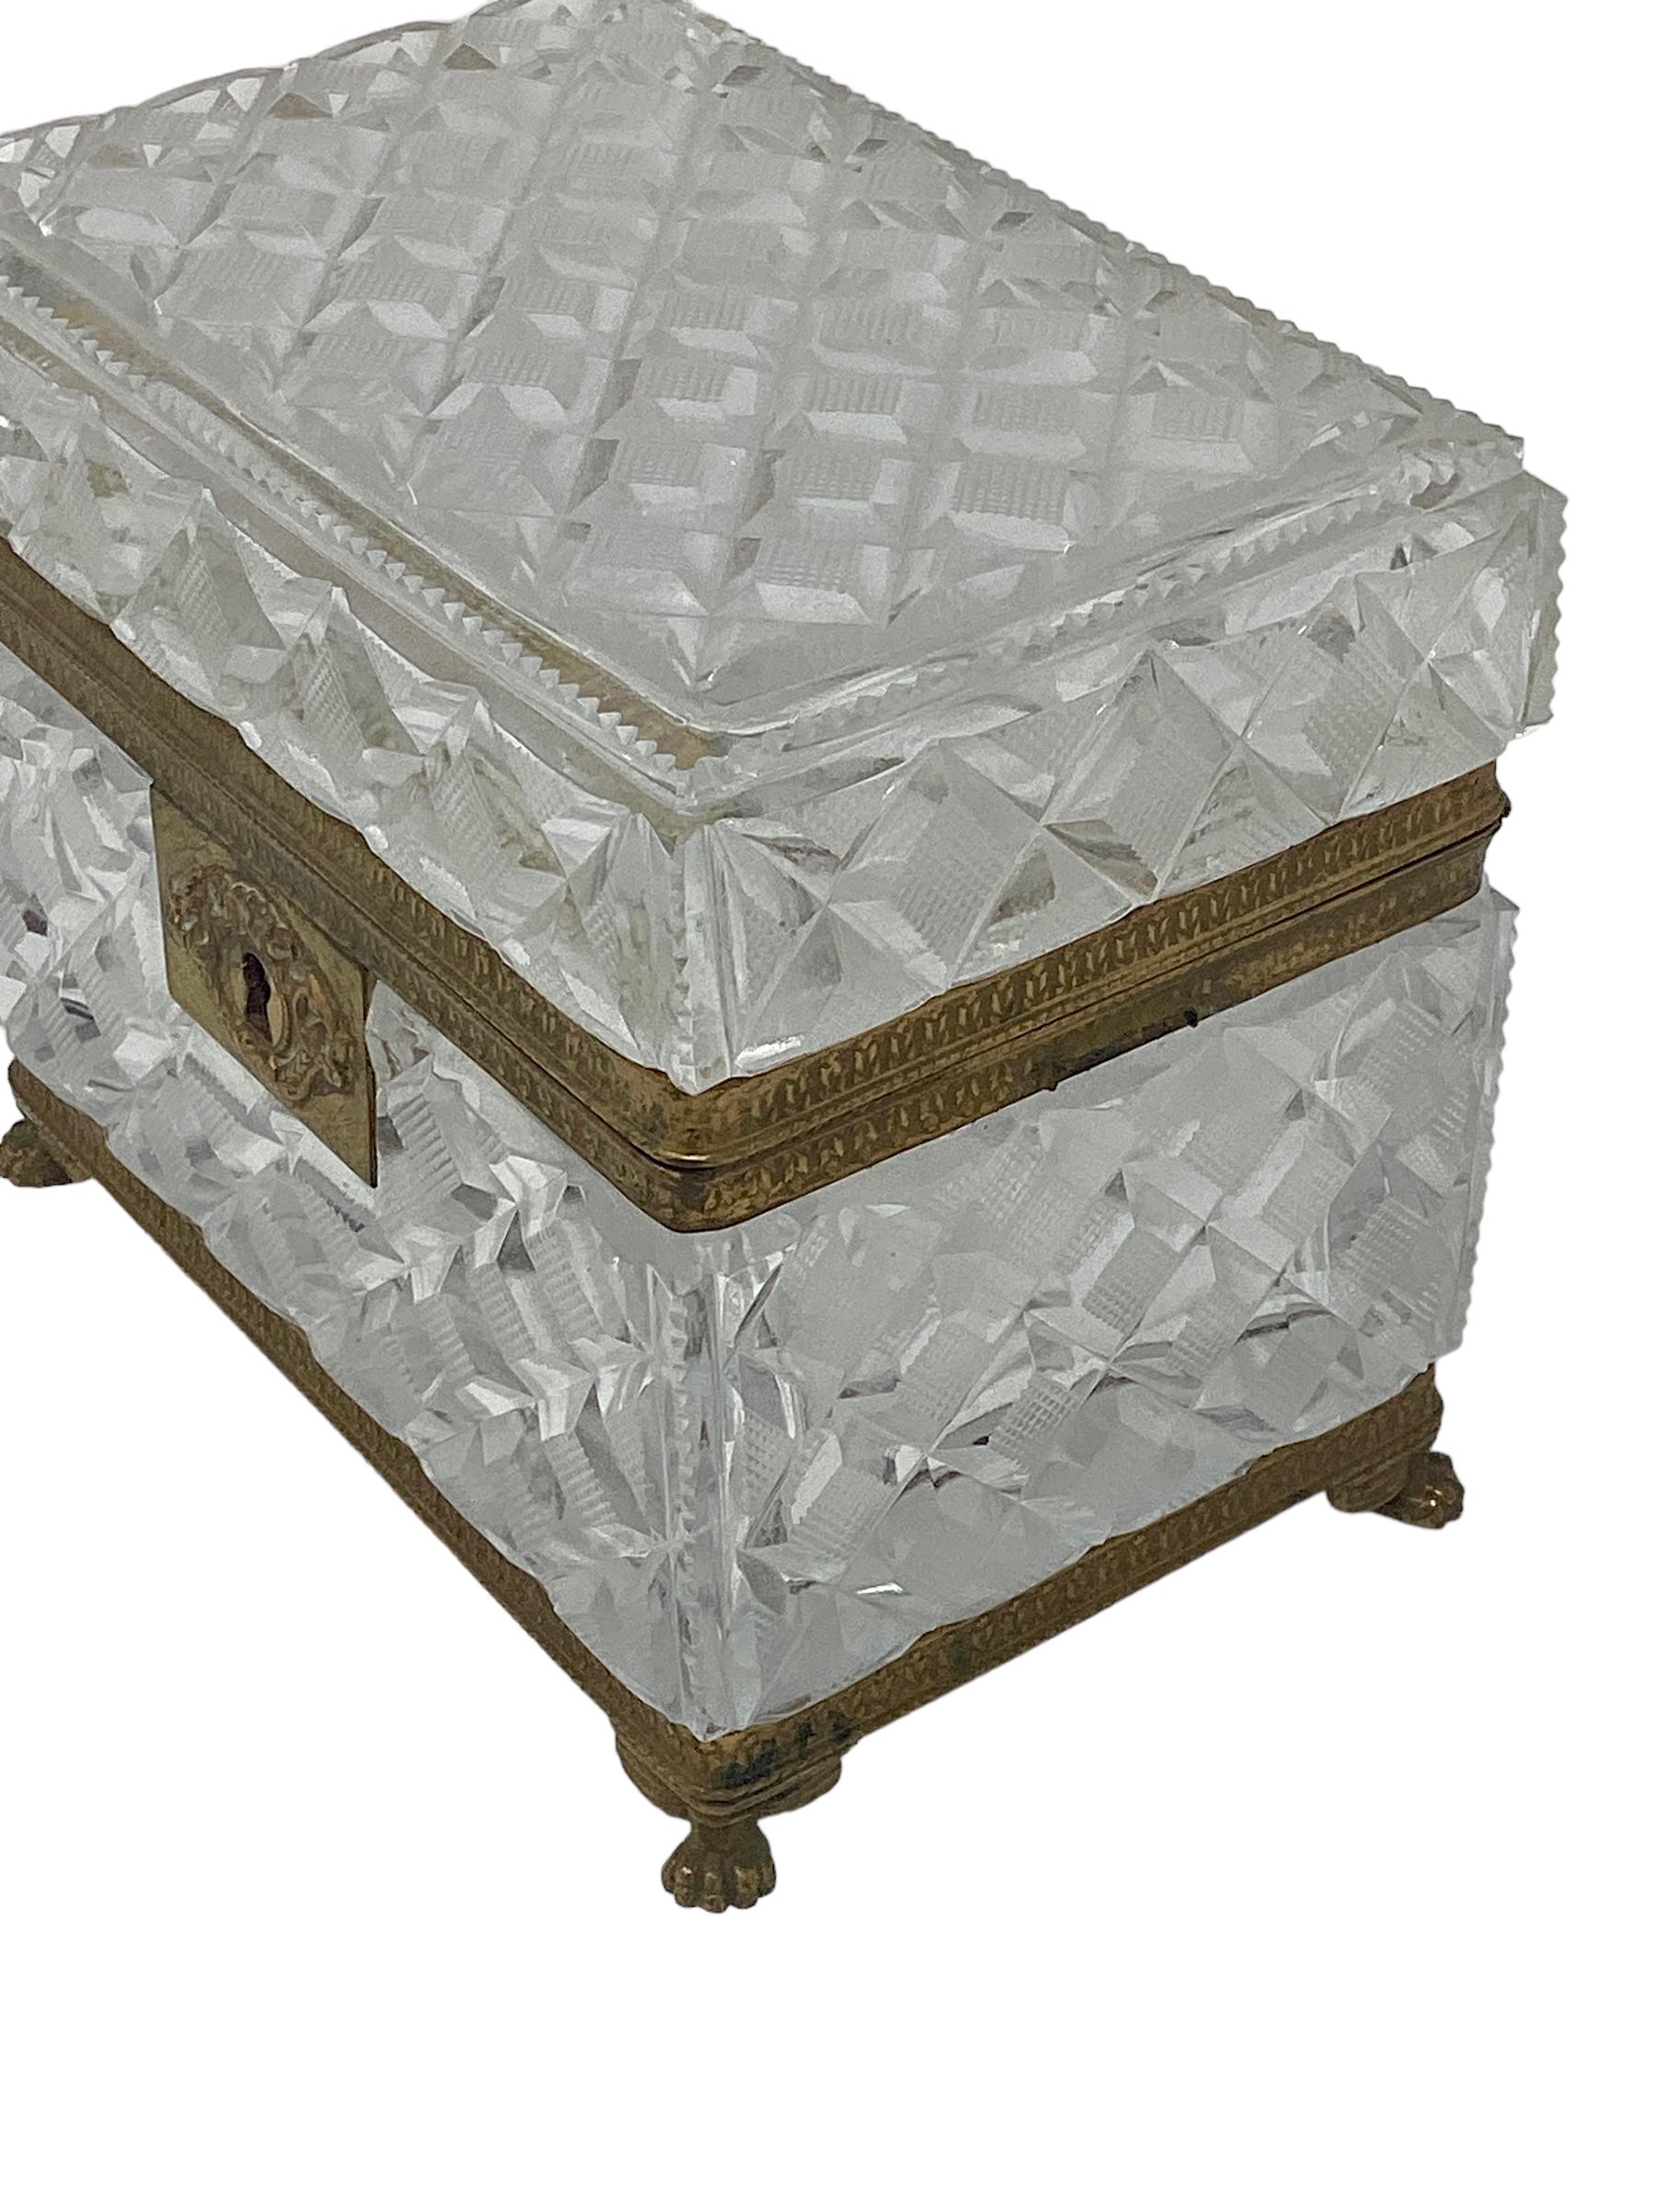 19th Century Baccarat Cut Crystal Box or Casket with Gilt Bronze Mounts  In Good Condition For Sale In Chapel Hill, NC